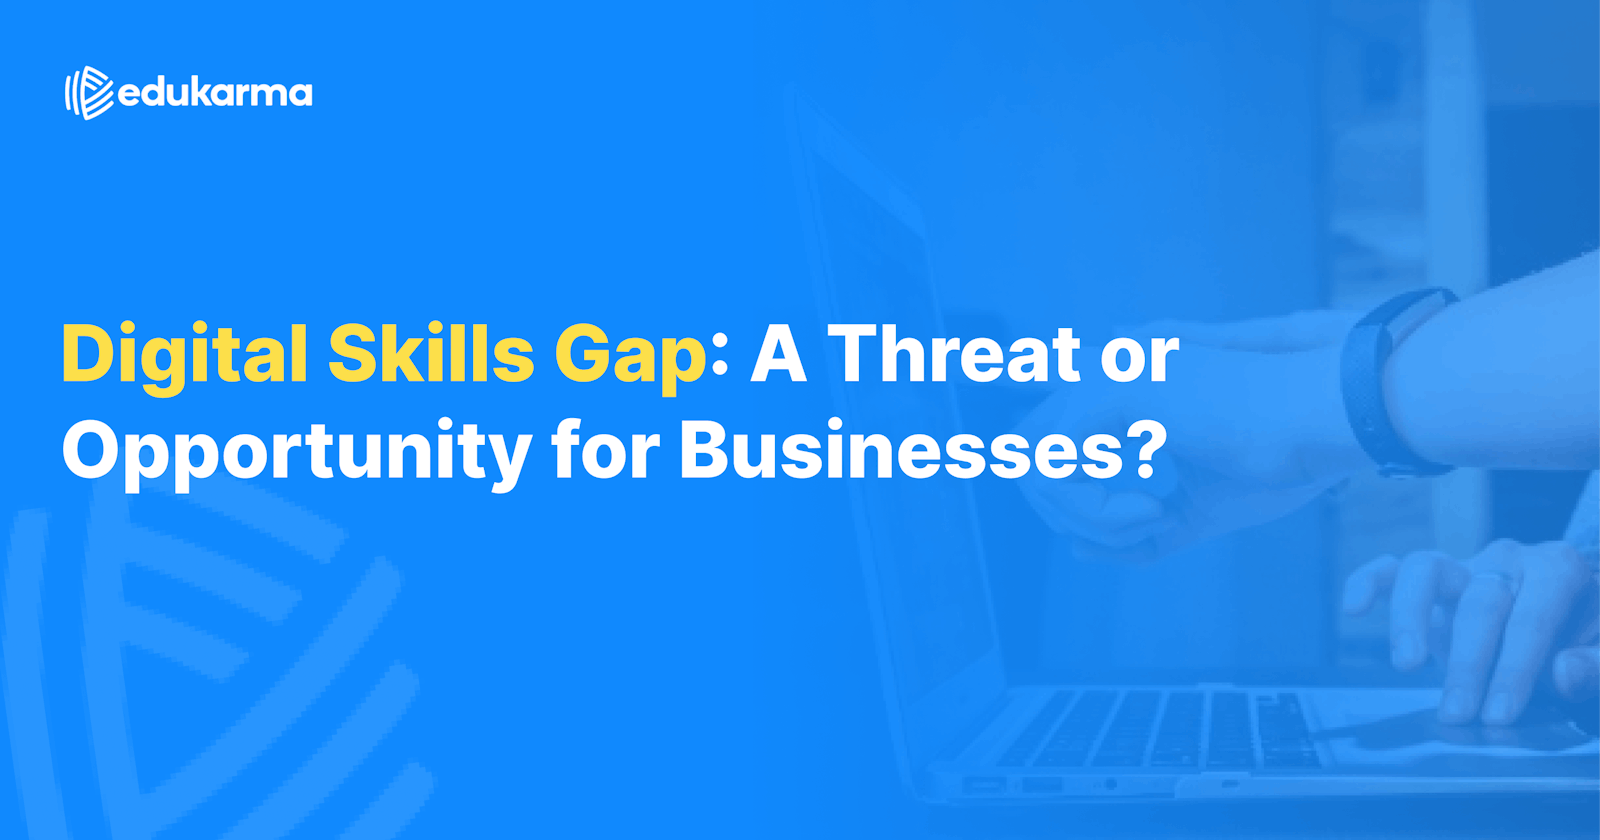 Digital Skills Gap: A Threat or Opportunity for Businesses?